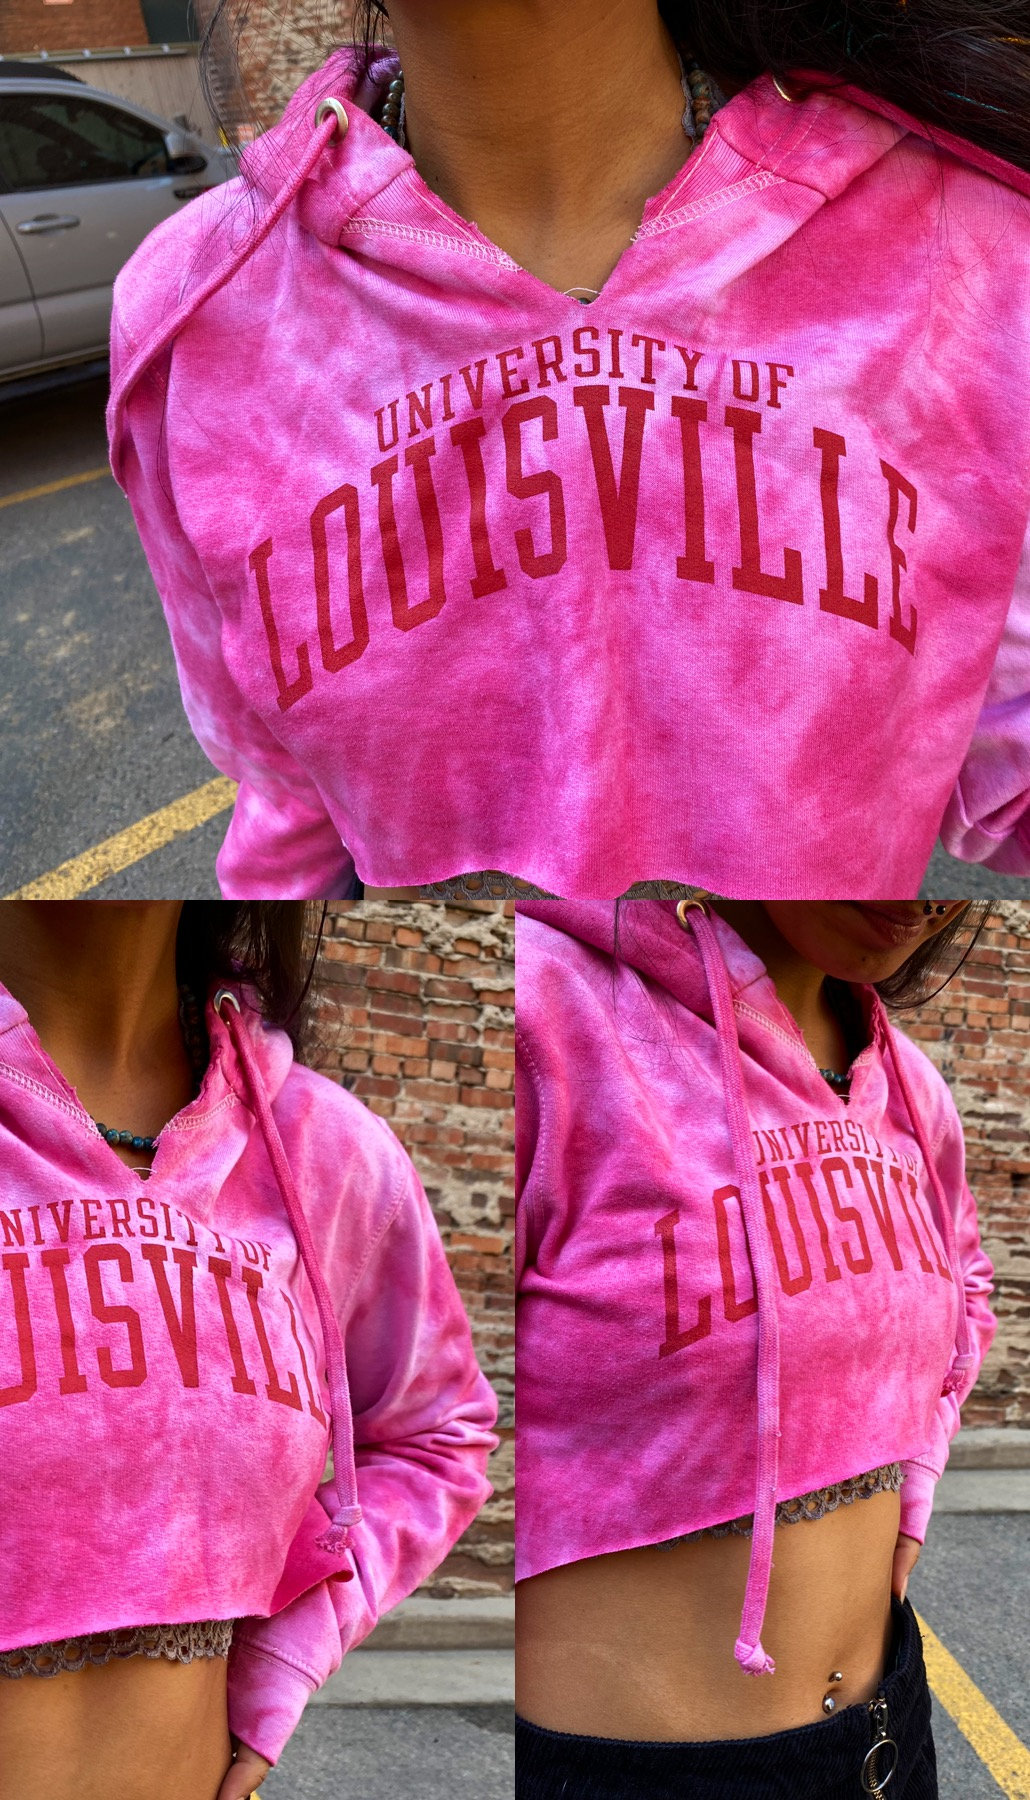 rag2swagg Louisville Cropped Hoodie, Cropped Hoodie, Louisville, Louisville Crop Top, Tie Dyed Crop Top, Tie Dyed Sweatshirt, Tie Dyed College Top